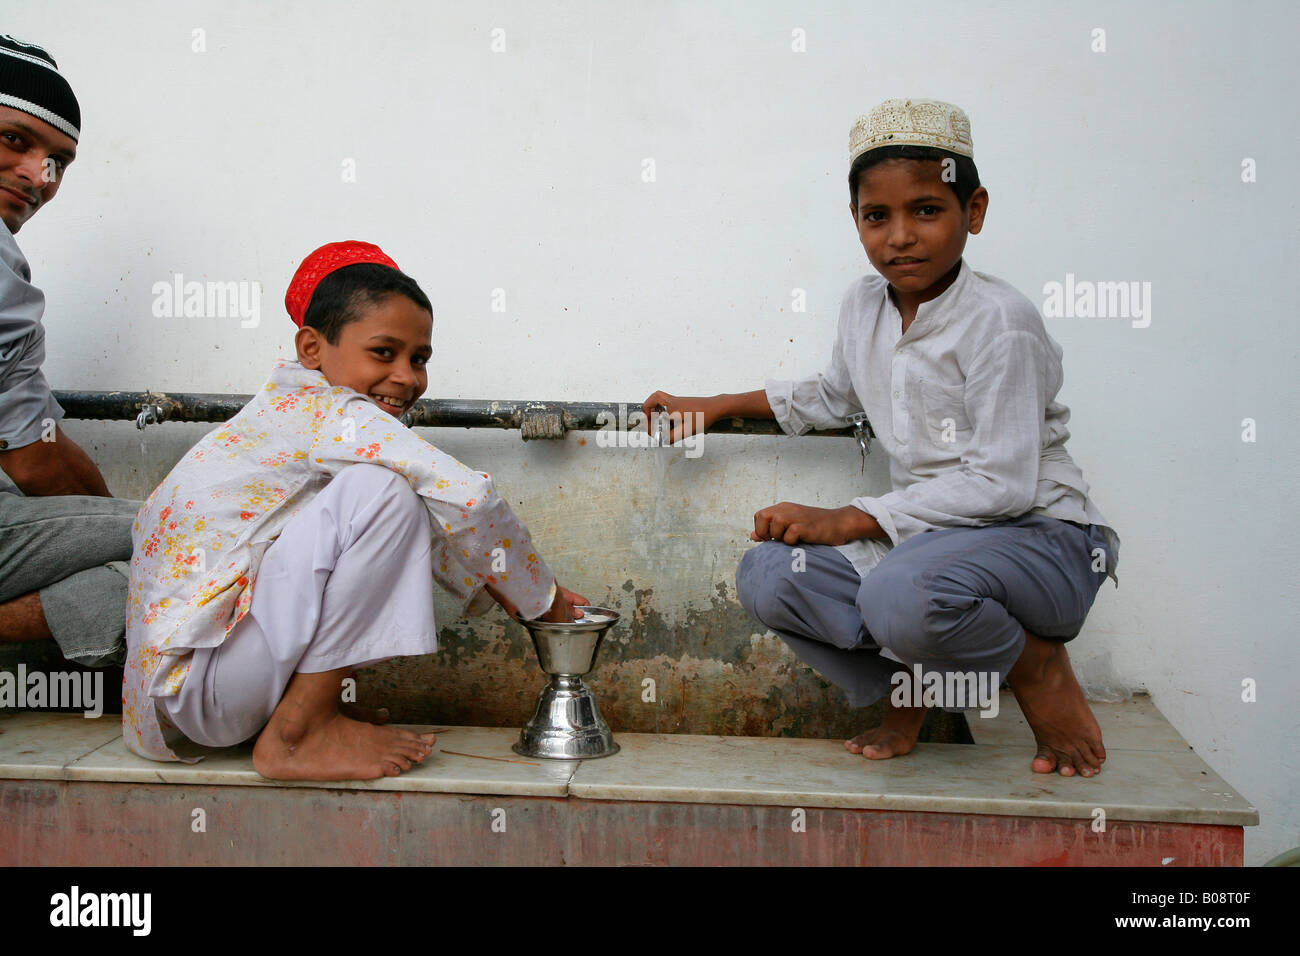 Boys cleaning ritual objects used at a shrine, Bareilly, Uttar Pradesh, India, Asia Stock Photo